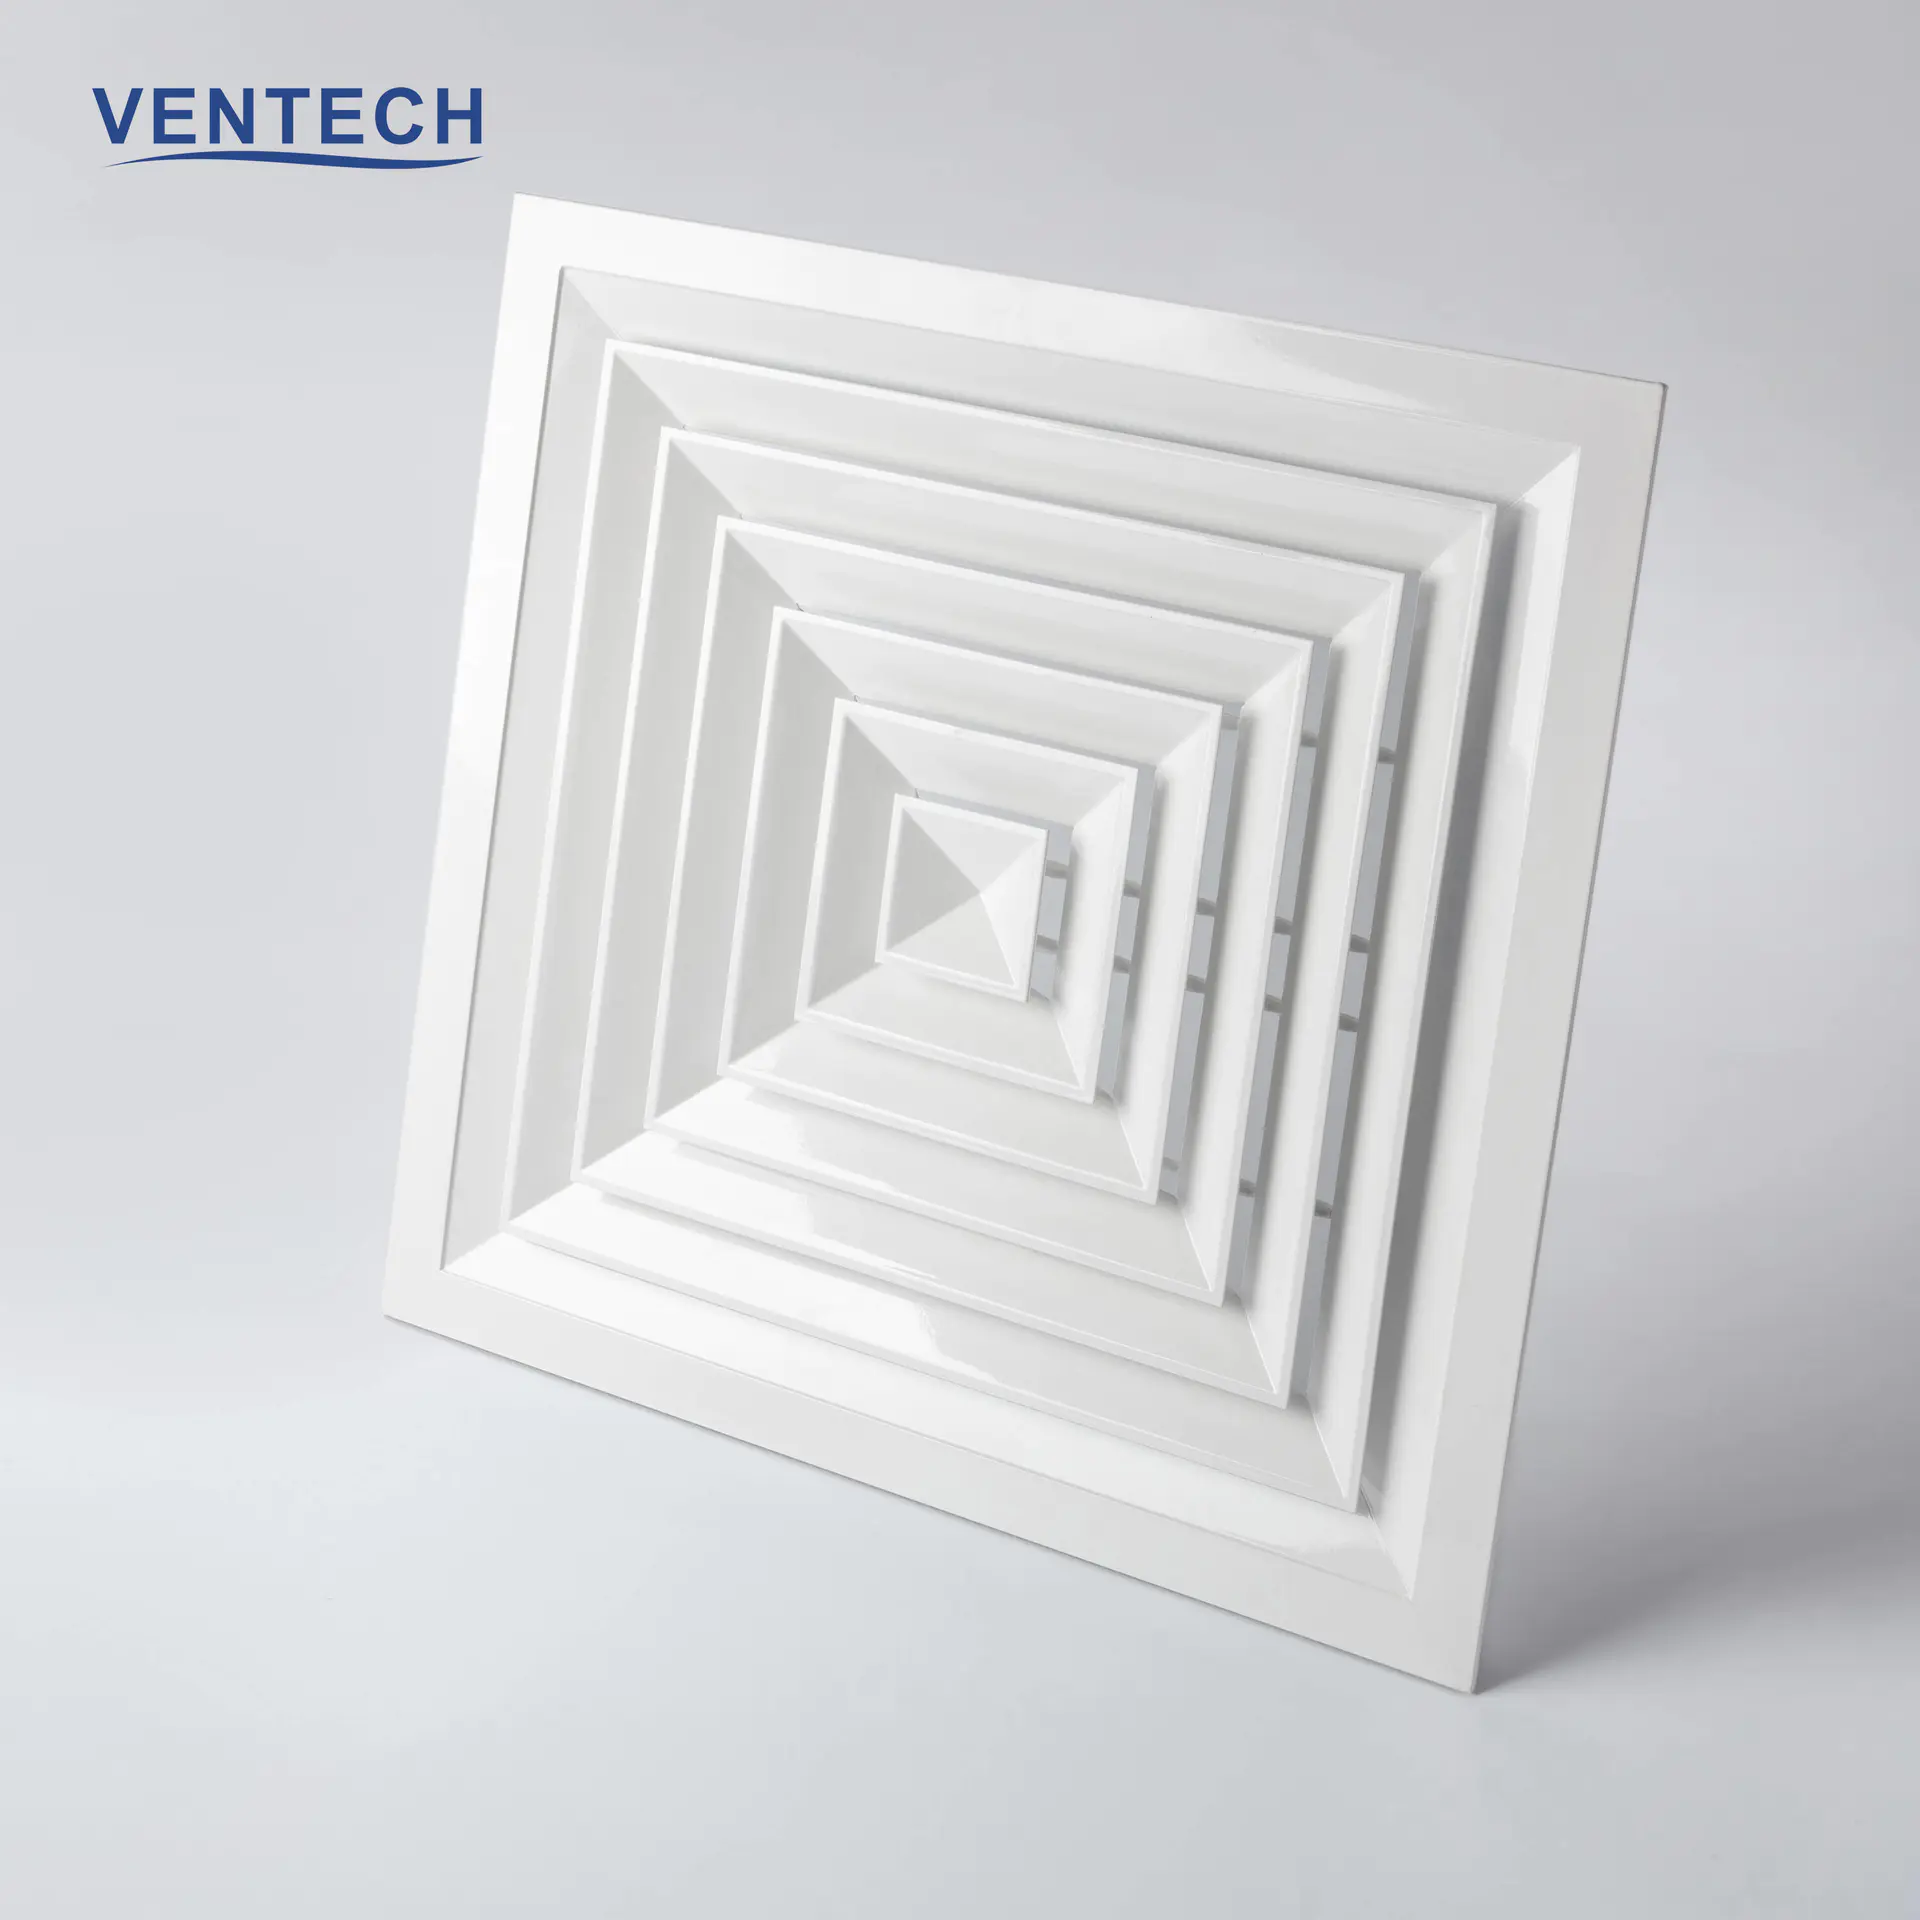 Air conditioining ceiling tile replacement supply air square diffuser